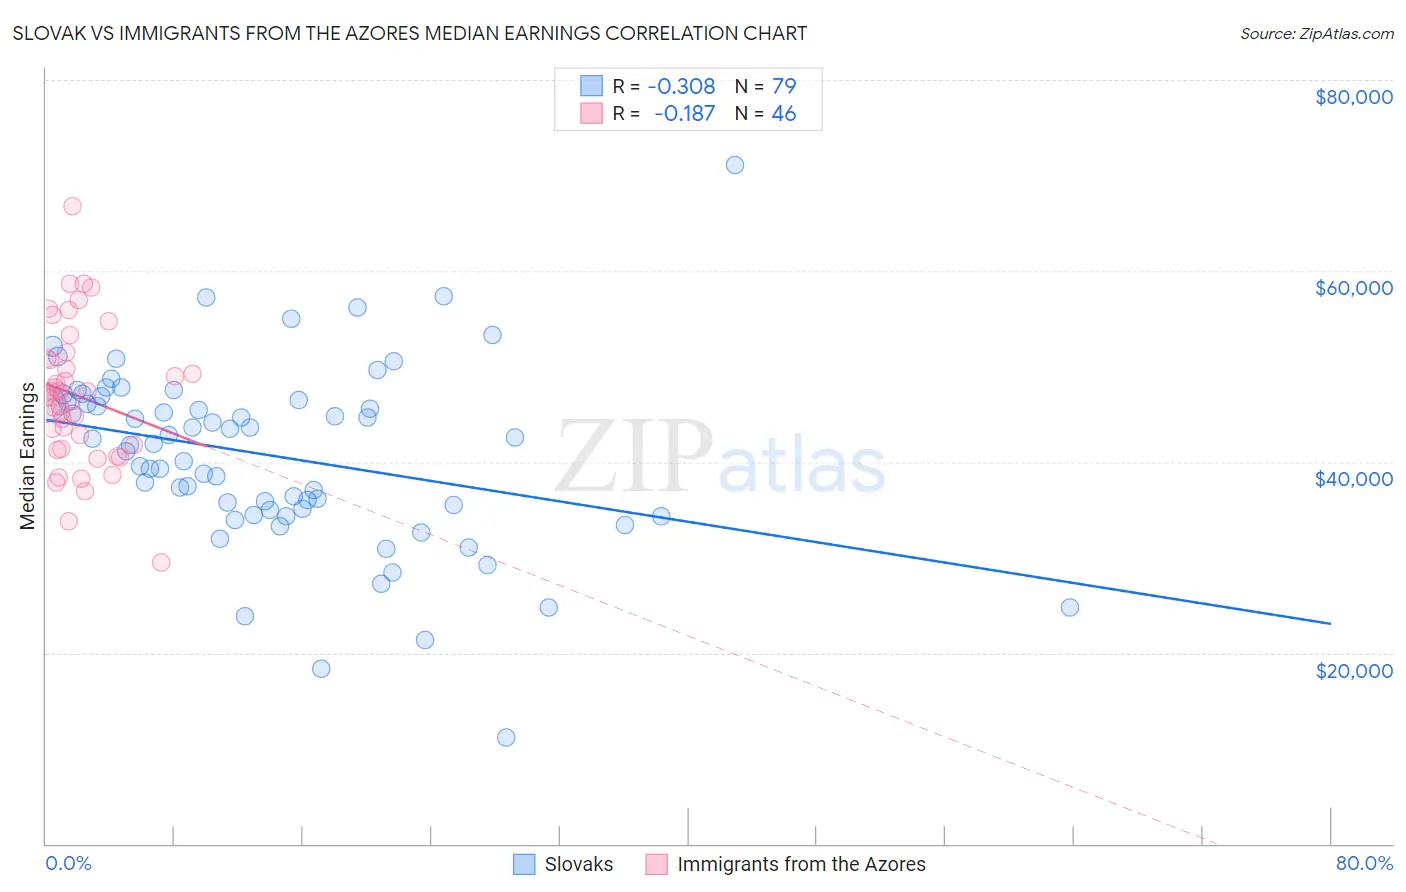 Slovak vs Immigrants from the Azores Median Earnings